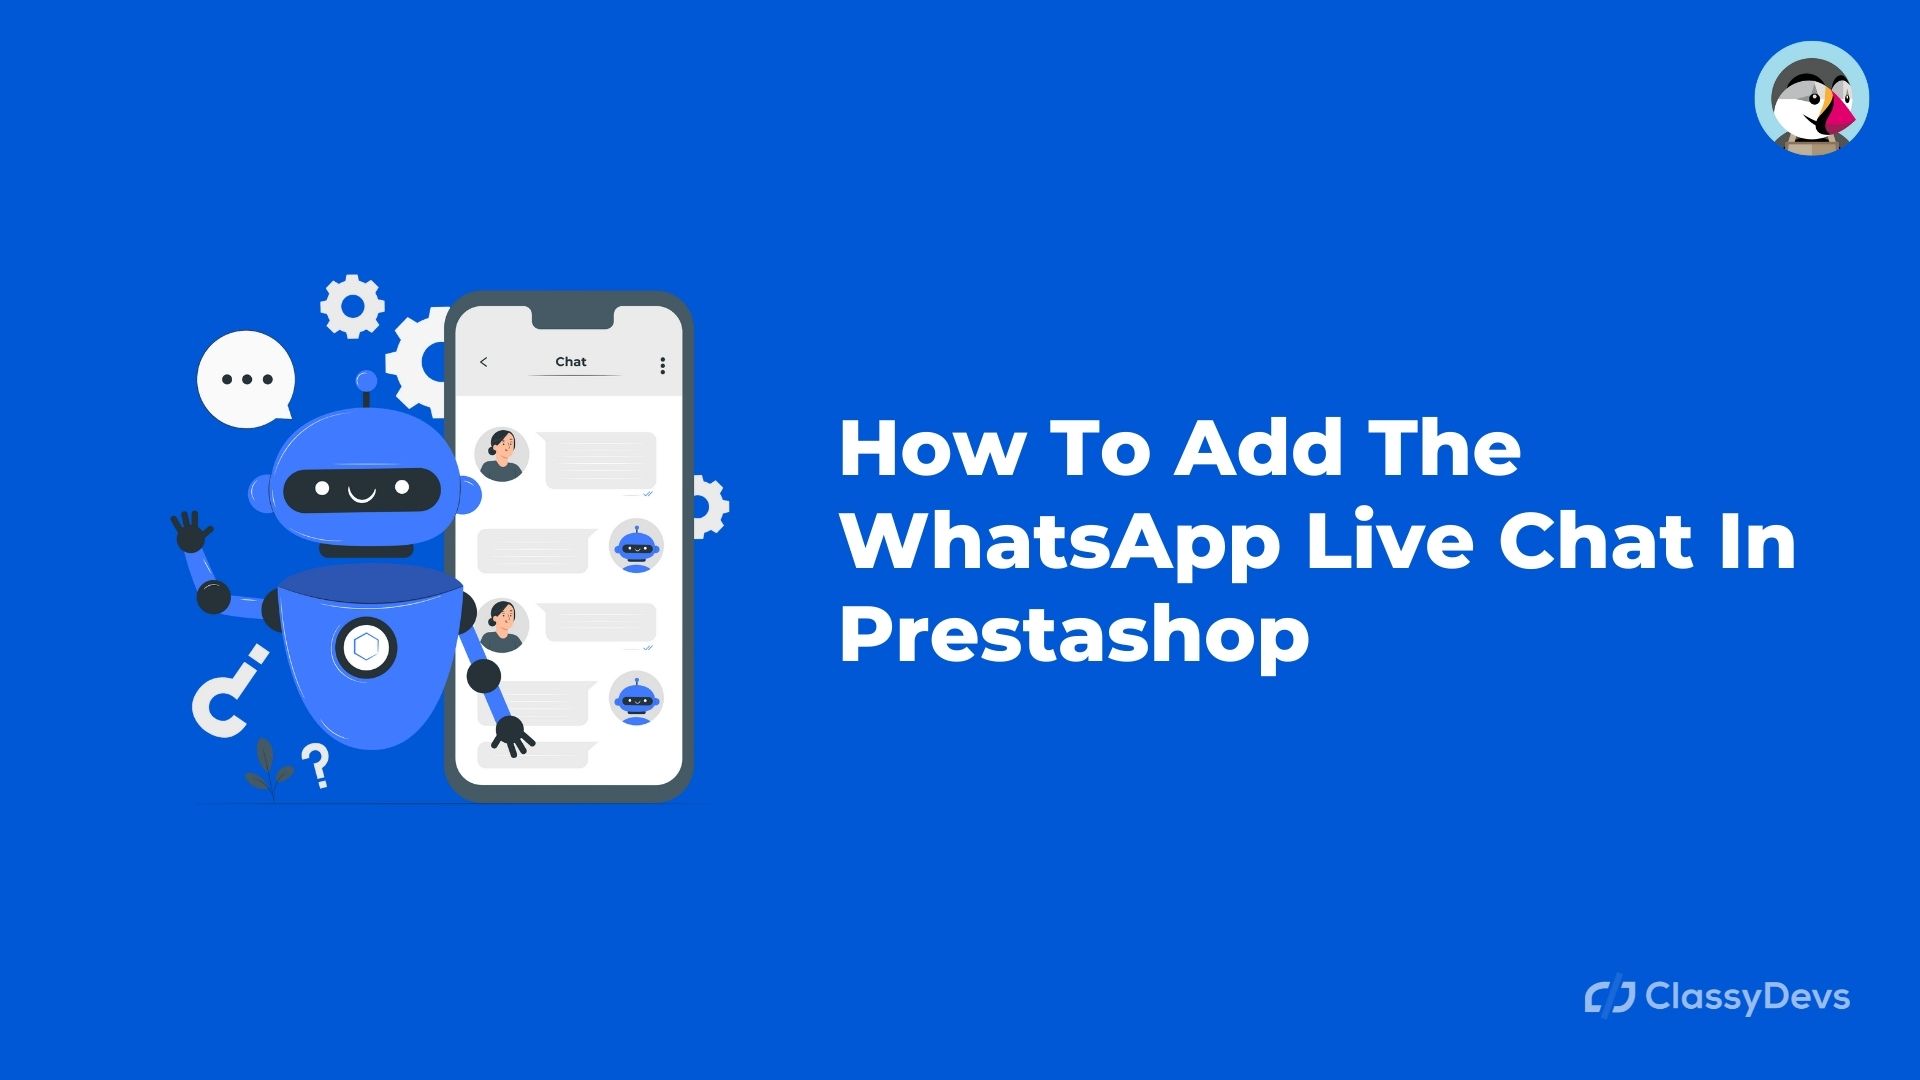 How To Add The WhatsApp Live Chat In Prestashop